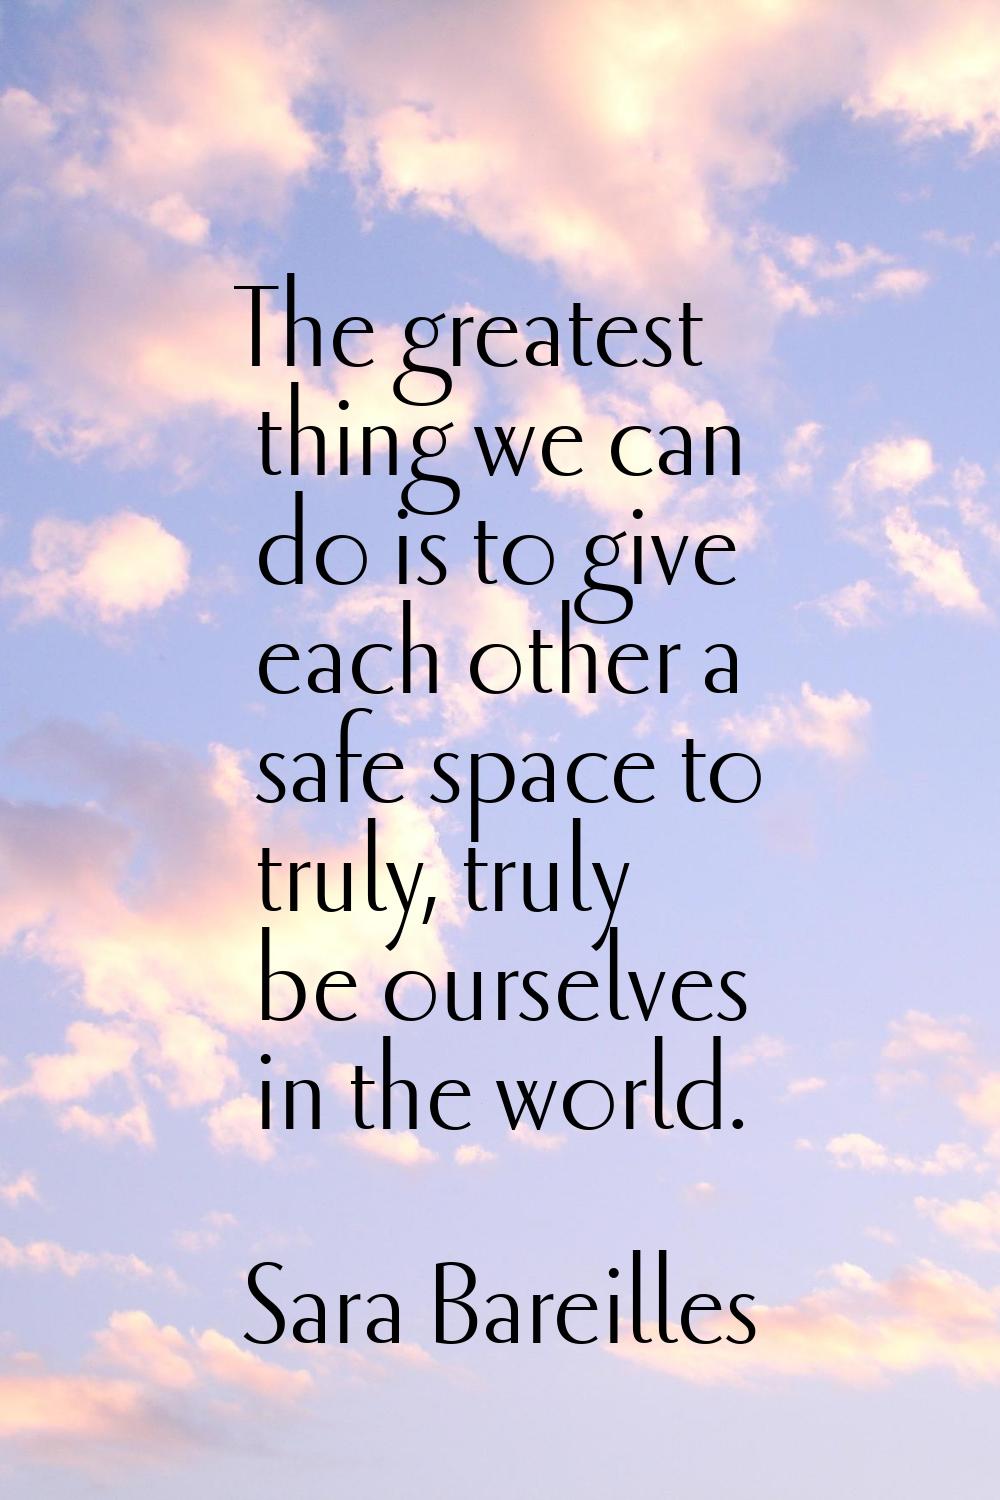 The greatest thing we can do is to give each other a safe space to truly, truly be ourselves in the